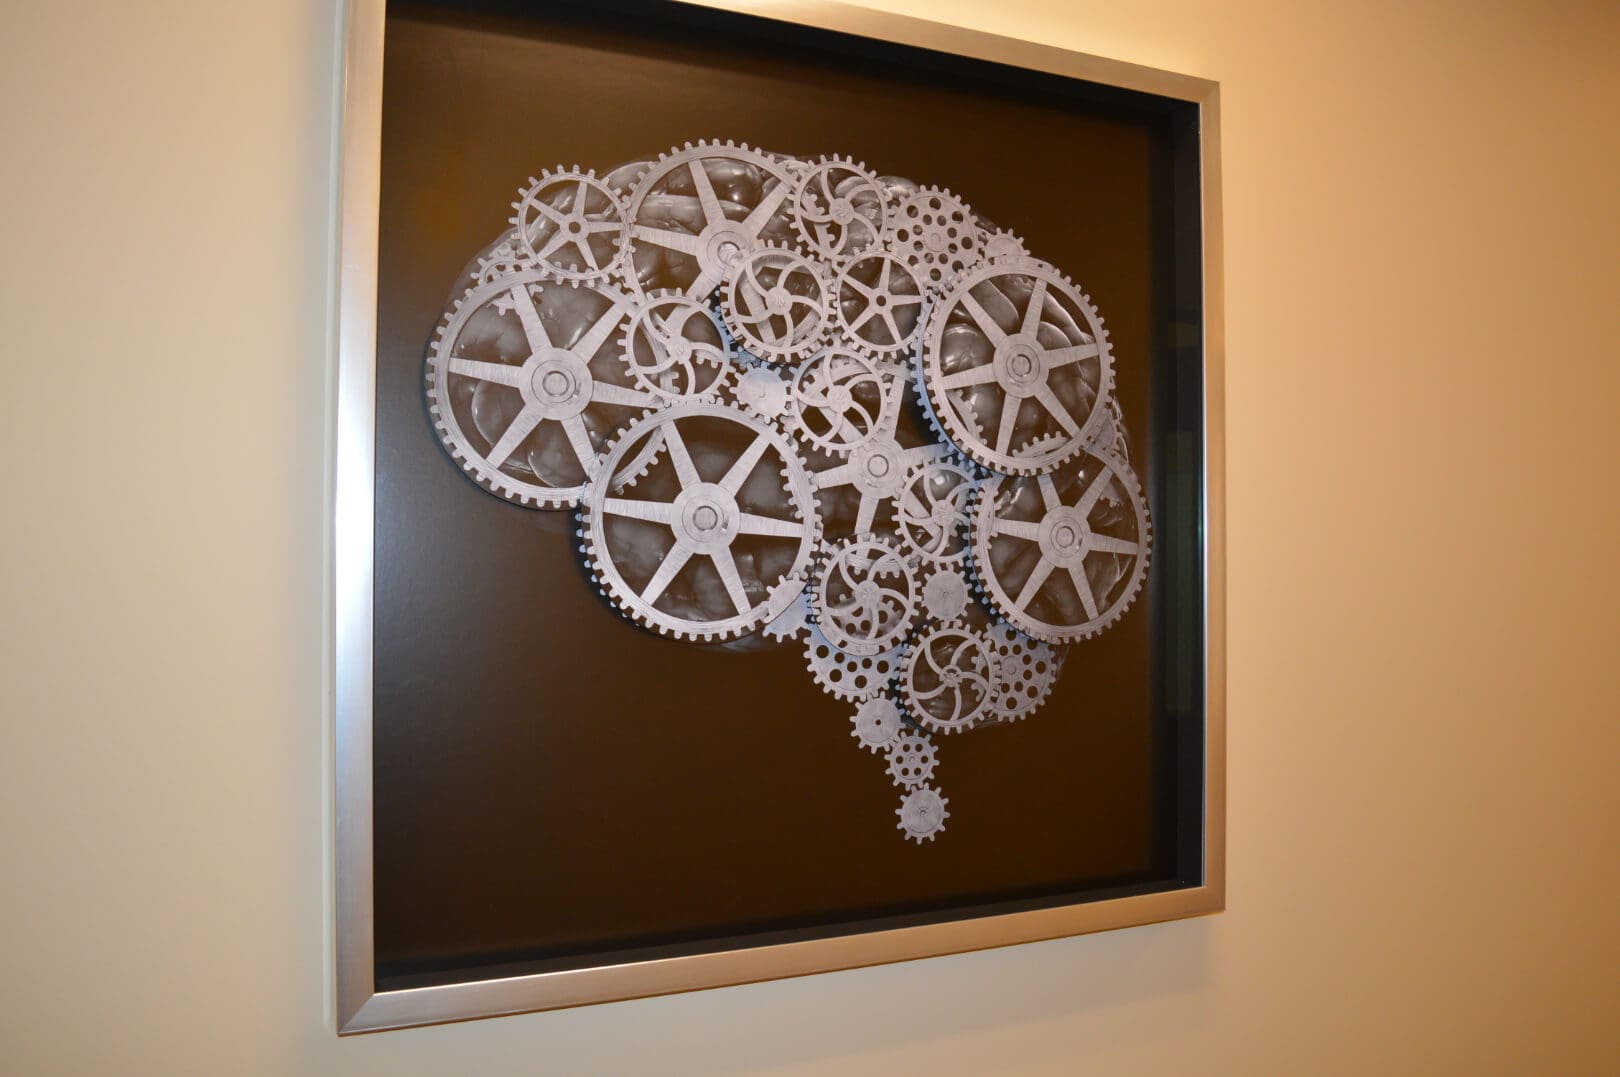 Human Head With Cogs frame on the wall